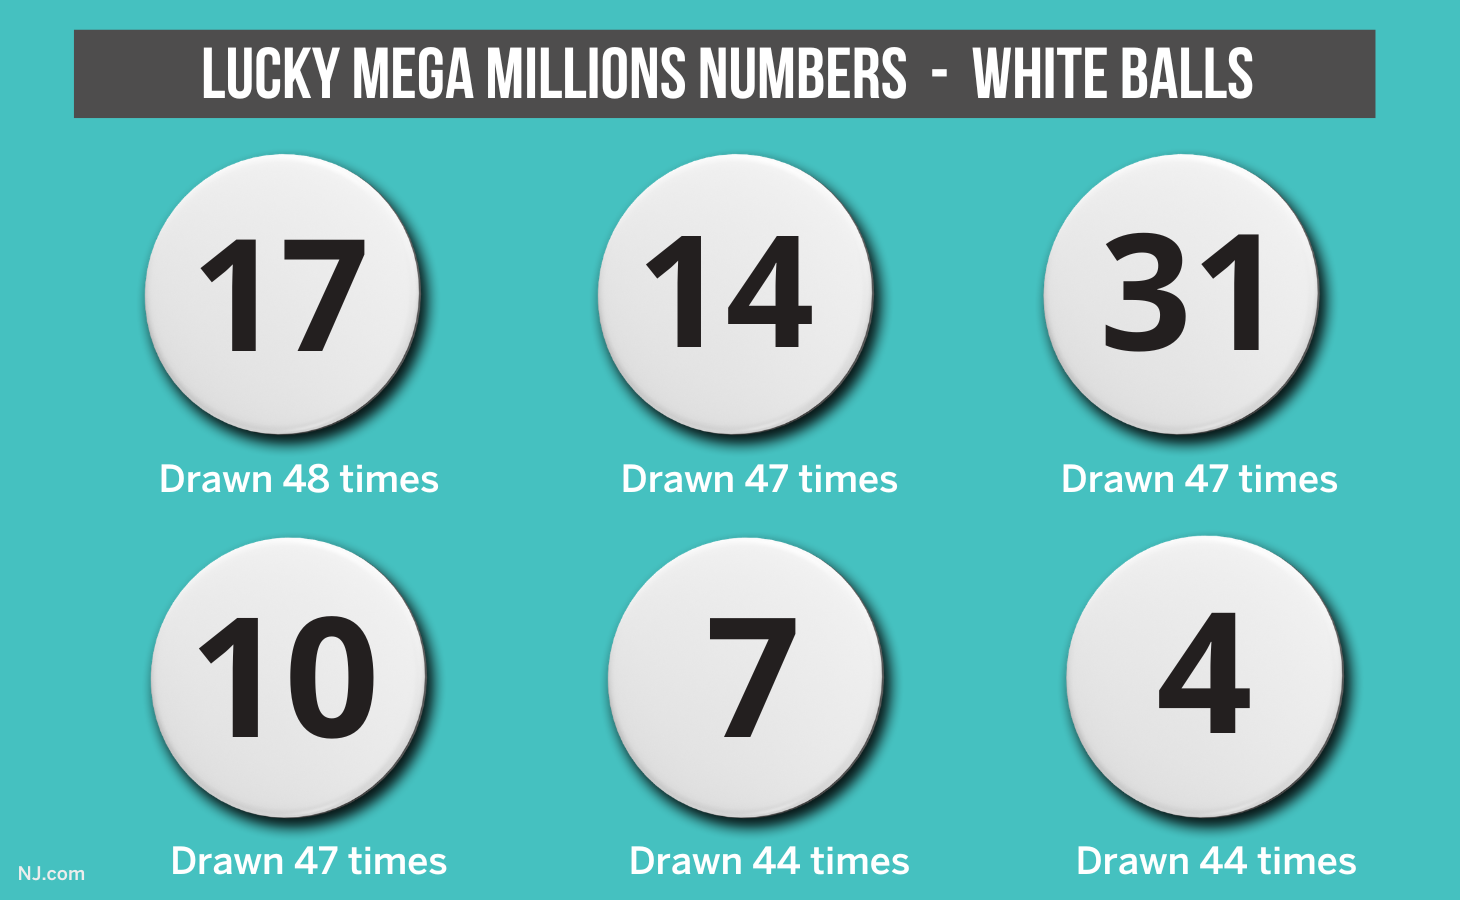 Mega Millions top winning numbers: These lucky lottery numbers are